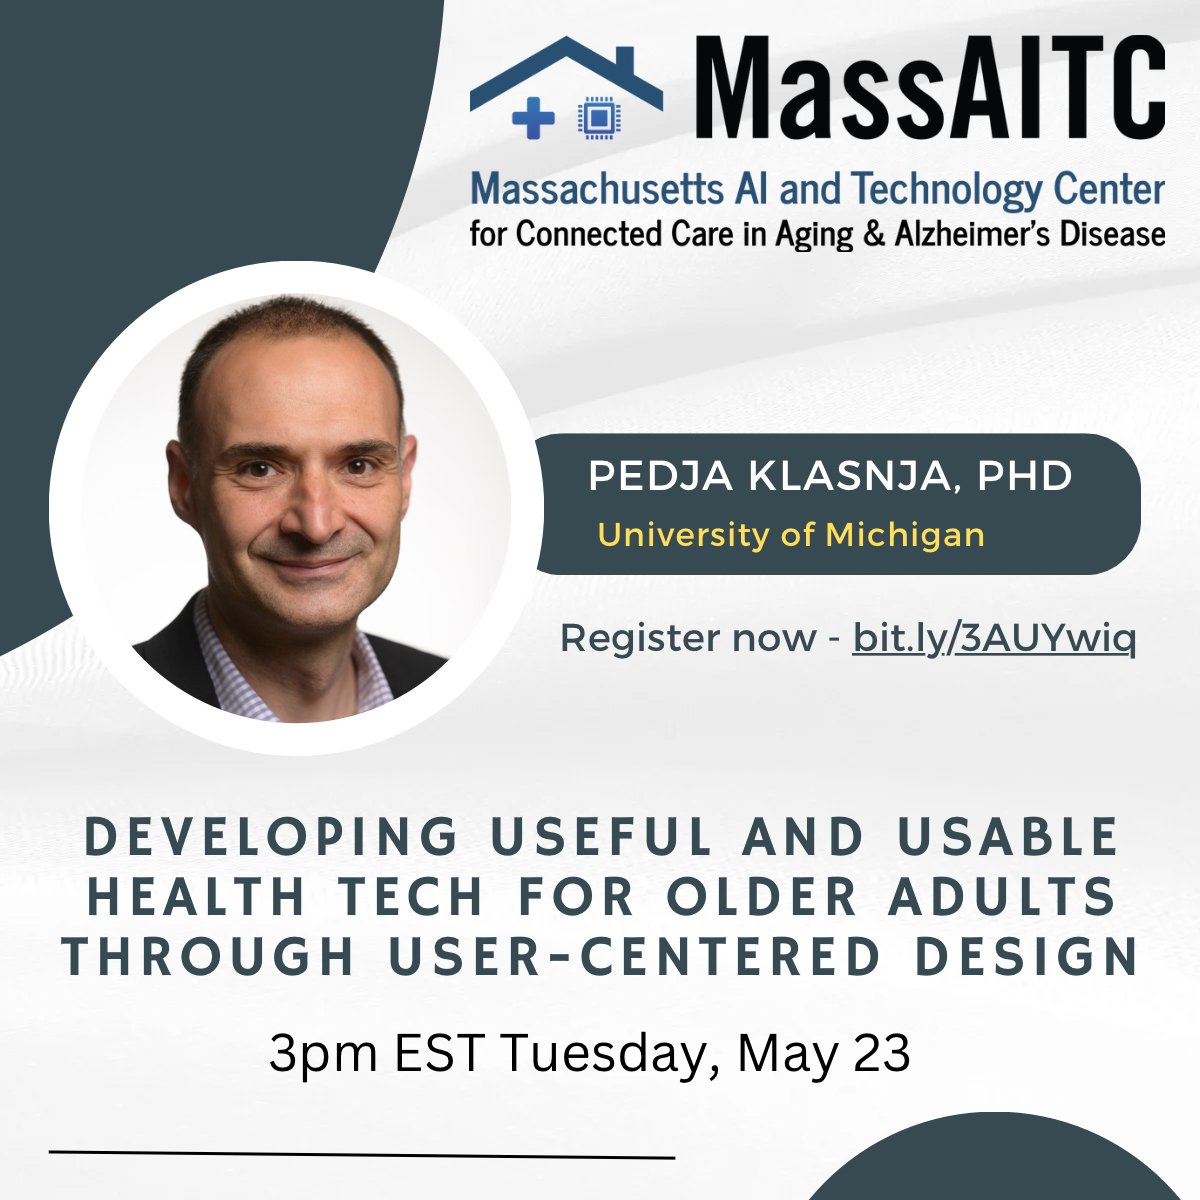 Join us on 5/23 at 3pm EST for Pedja Klasnja's talk on health tech for older adults through user-centered design.  Learn about design process, rapid prototyping, and considerations for cognitive impairment. #agetech #NIAfunded @manningcics @umsi @pklasnja
umass-amherst.zoom.us/meeting/regist…